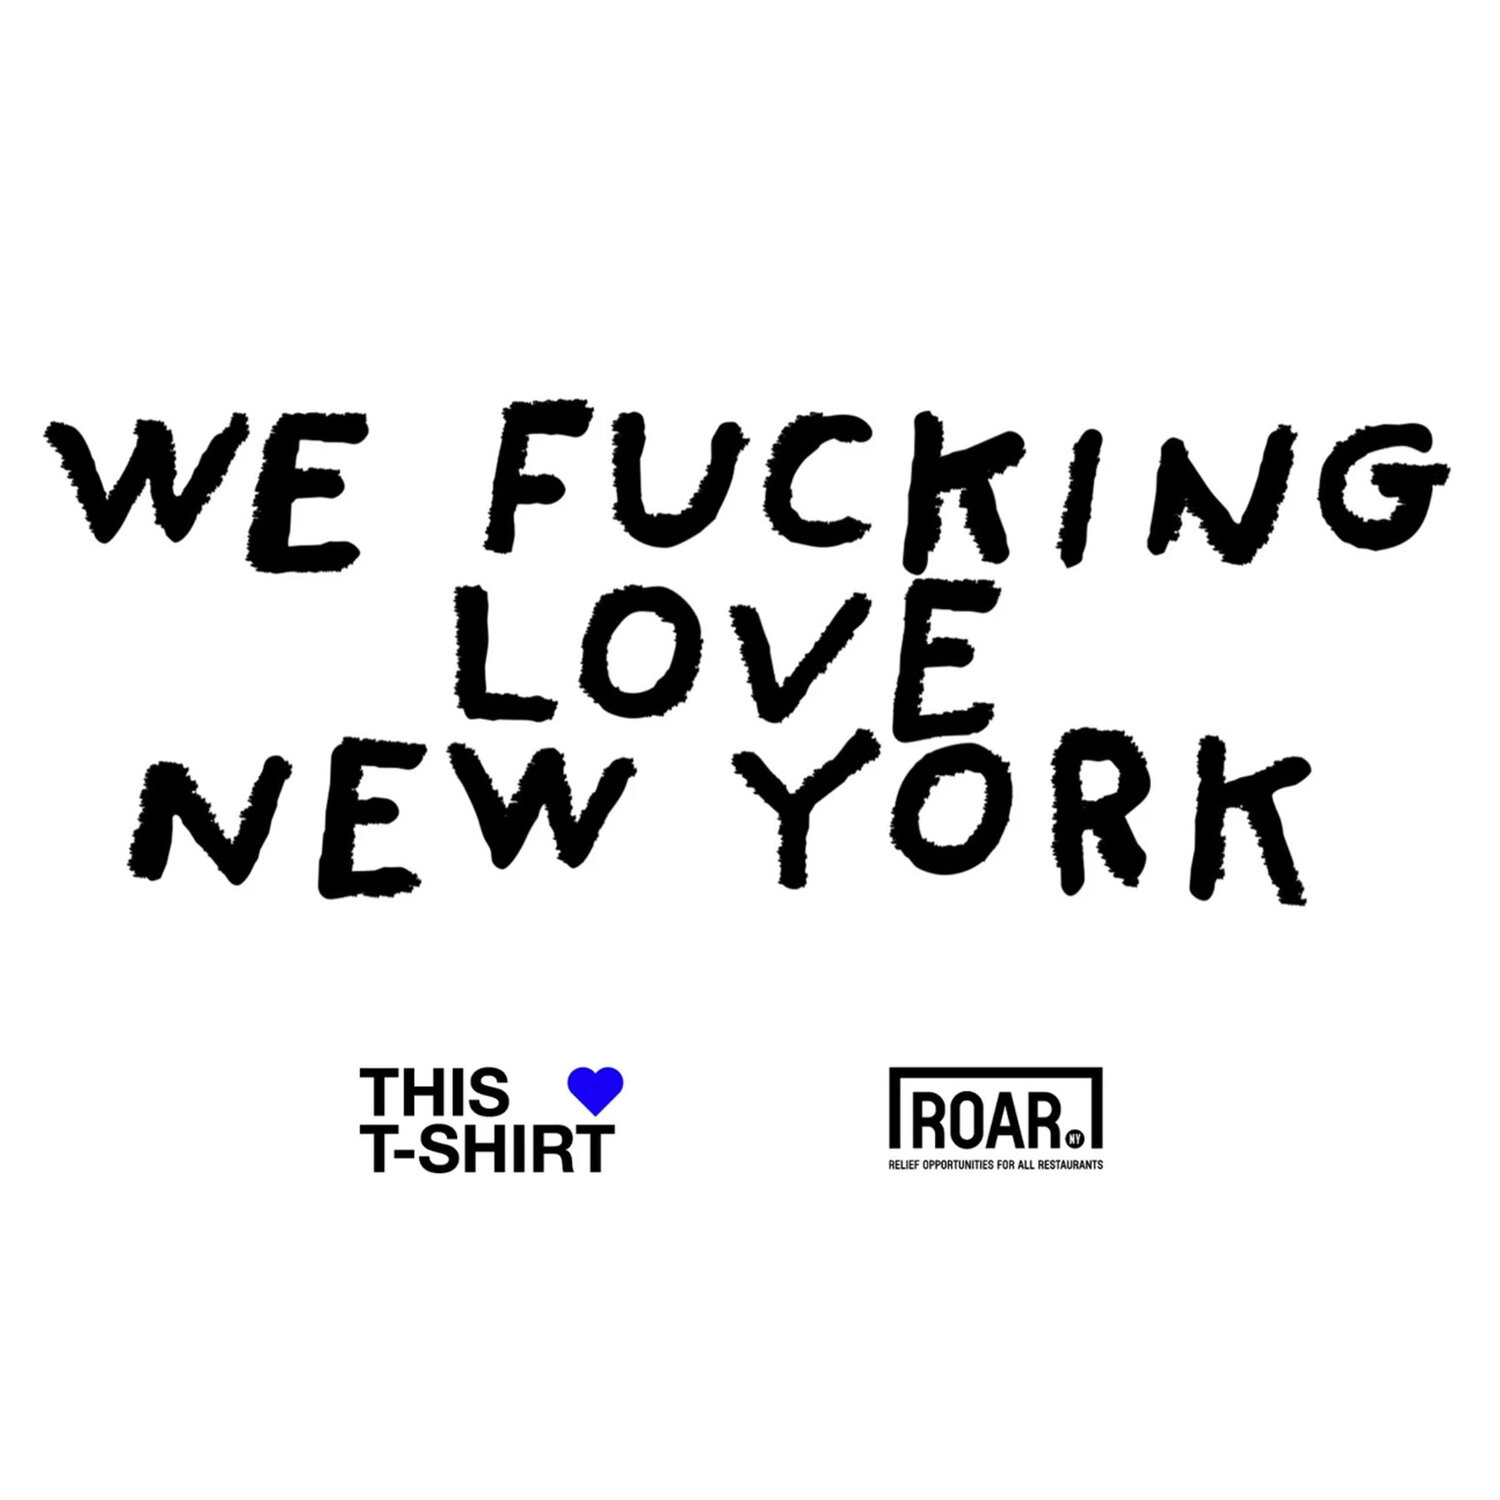 The New York We Fuck With